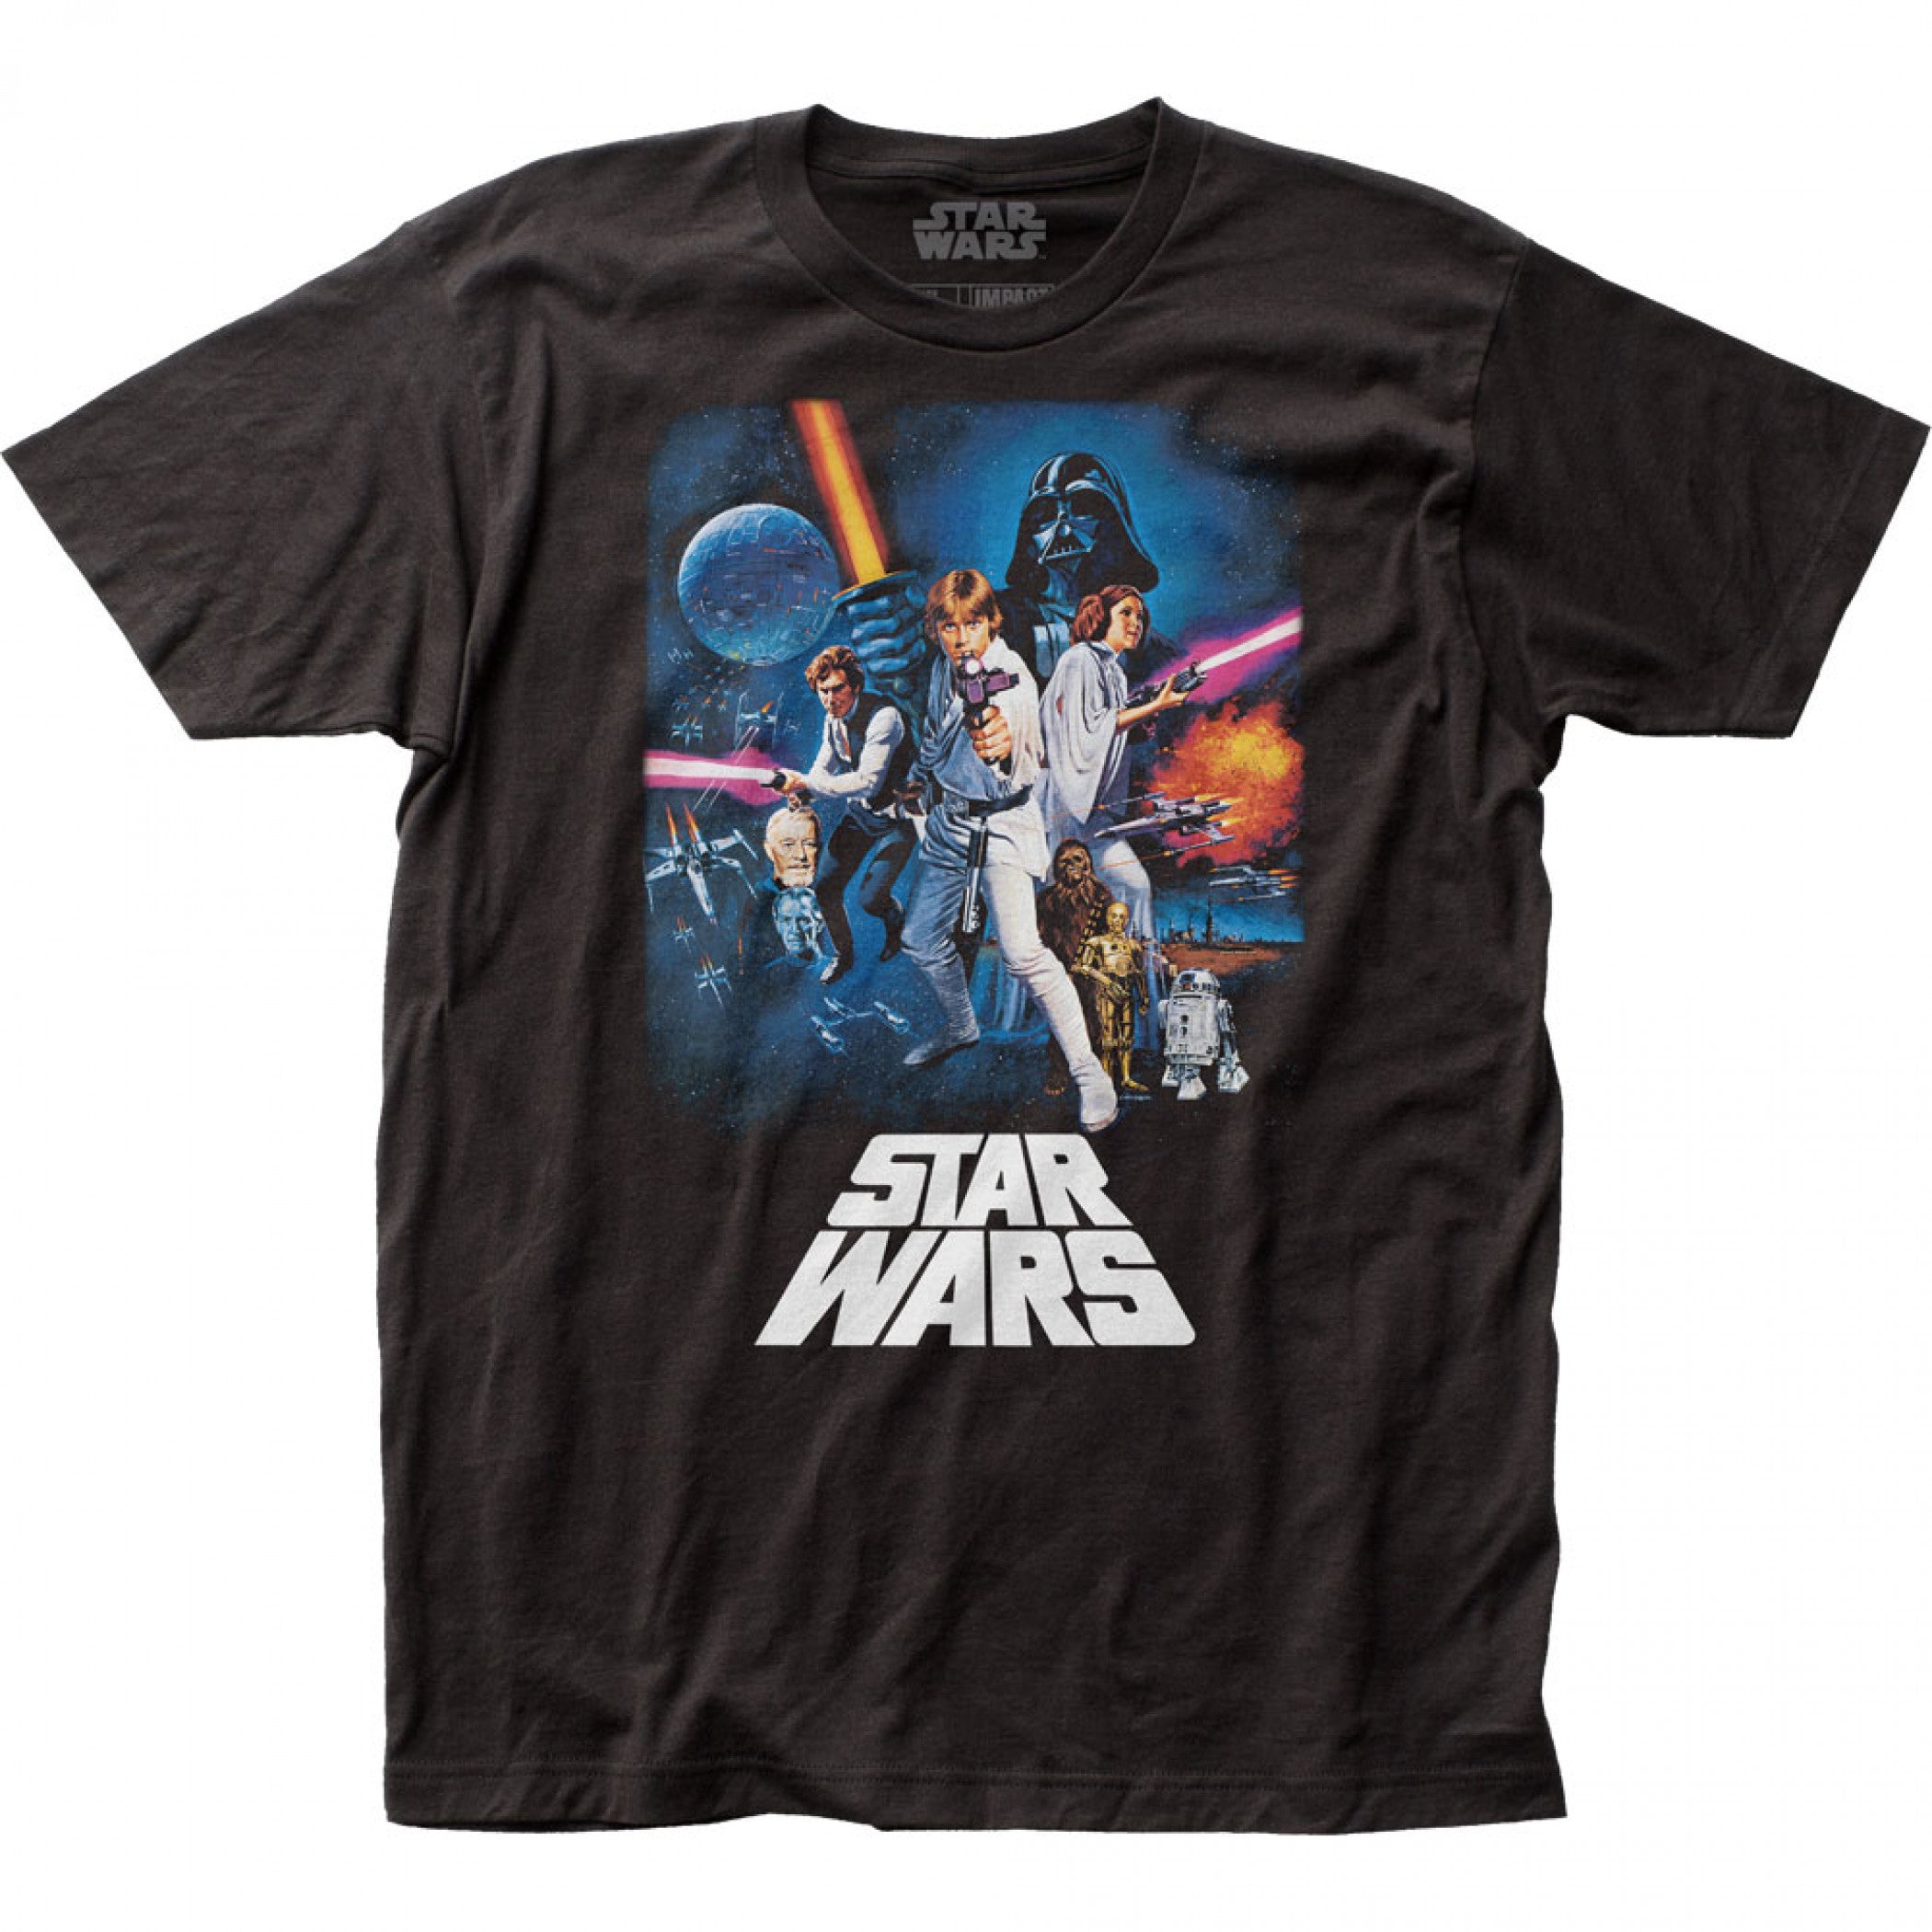 Star Wars A New Hope Movie Poster T-Shirt